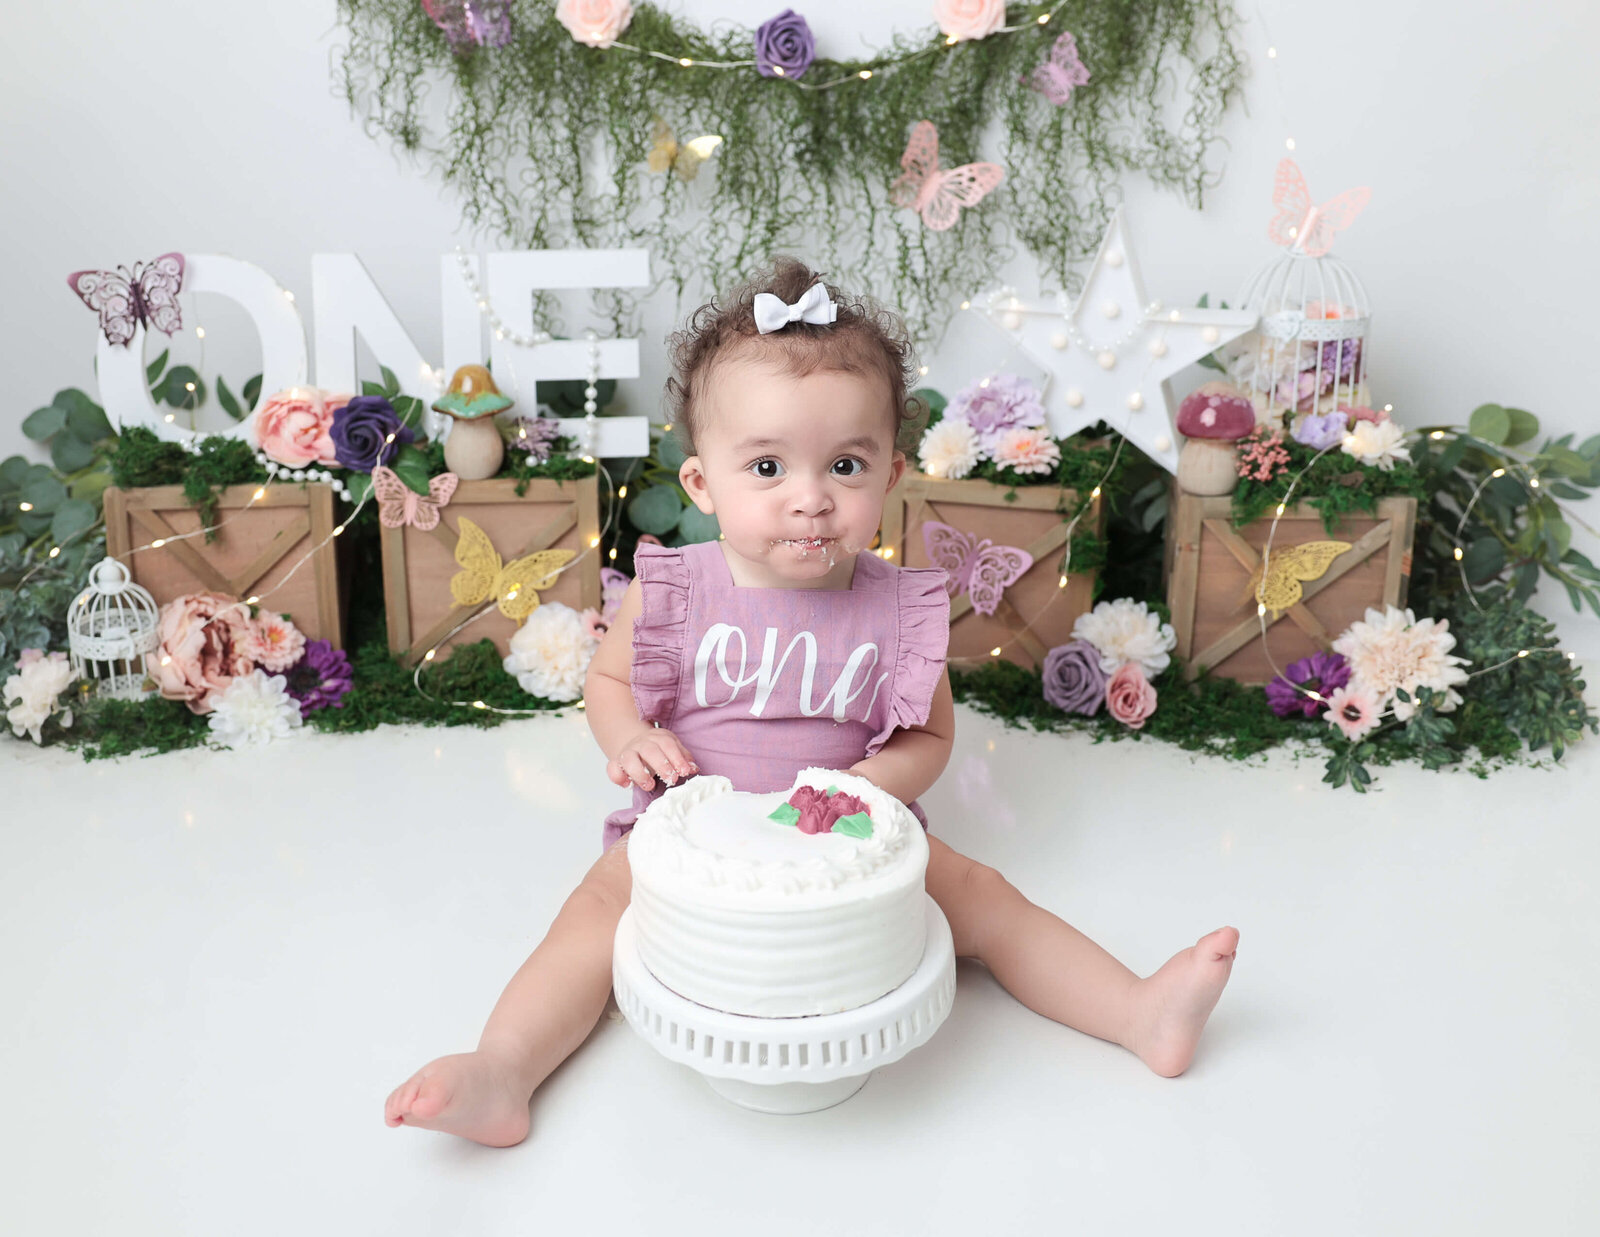 One year old with her cake at our studio.